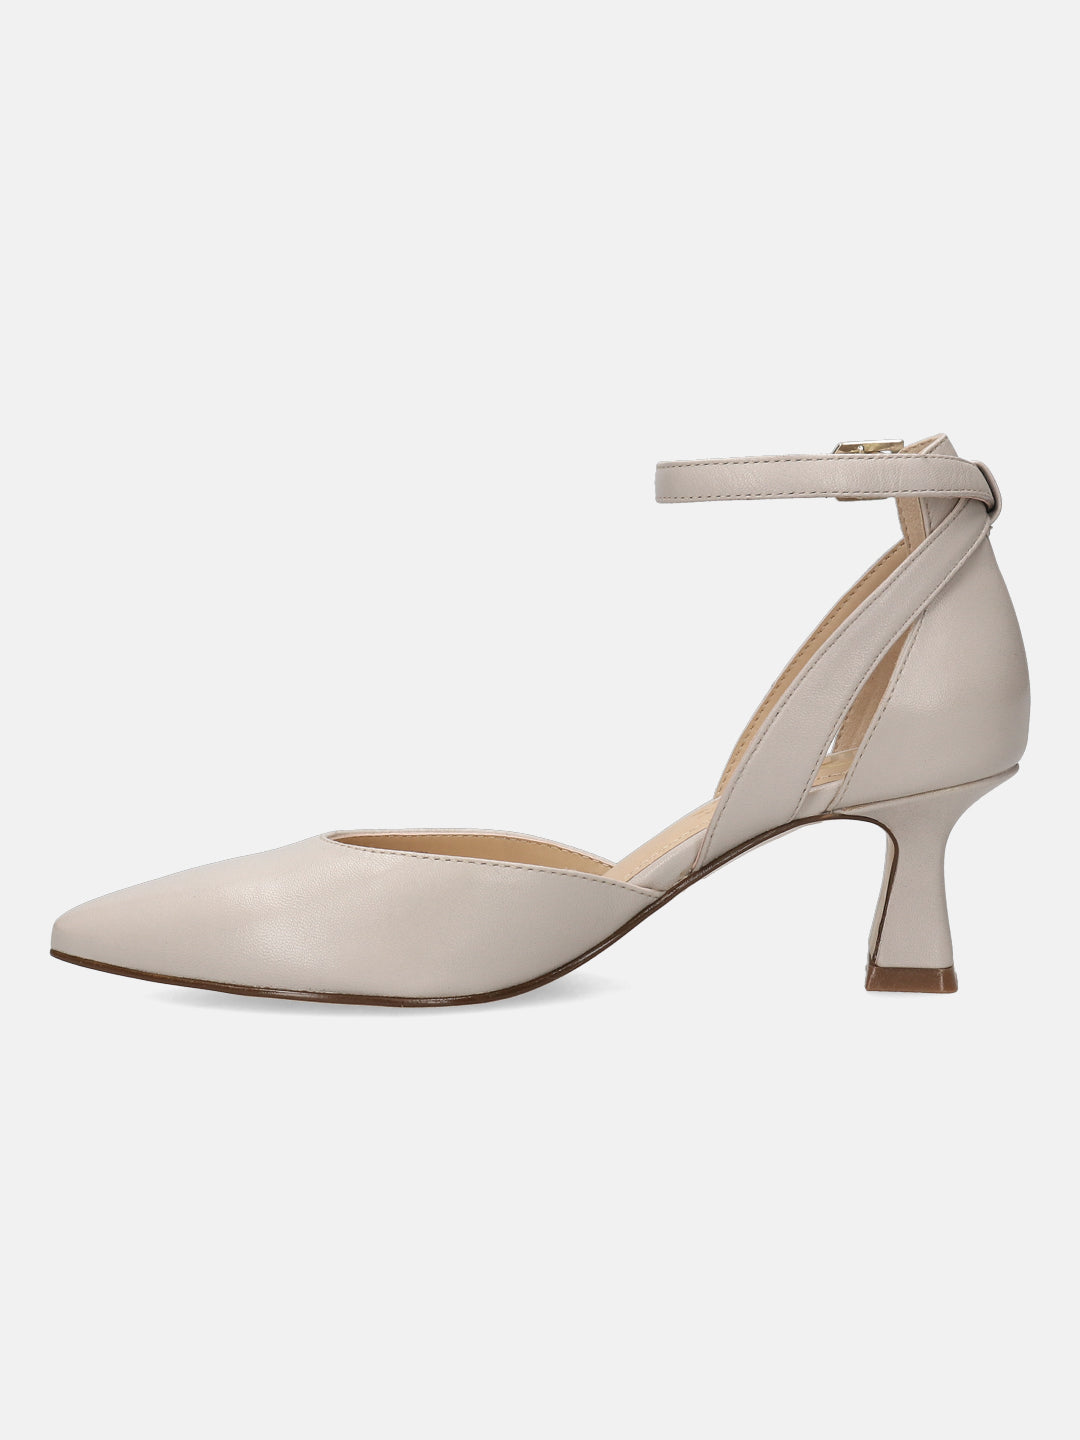 Varese Offwhite Leather Ankle Strap Heels